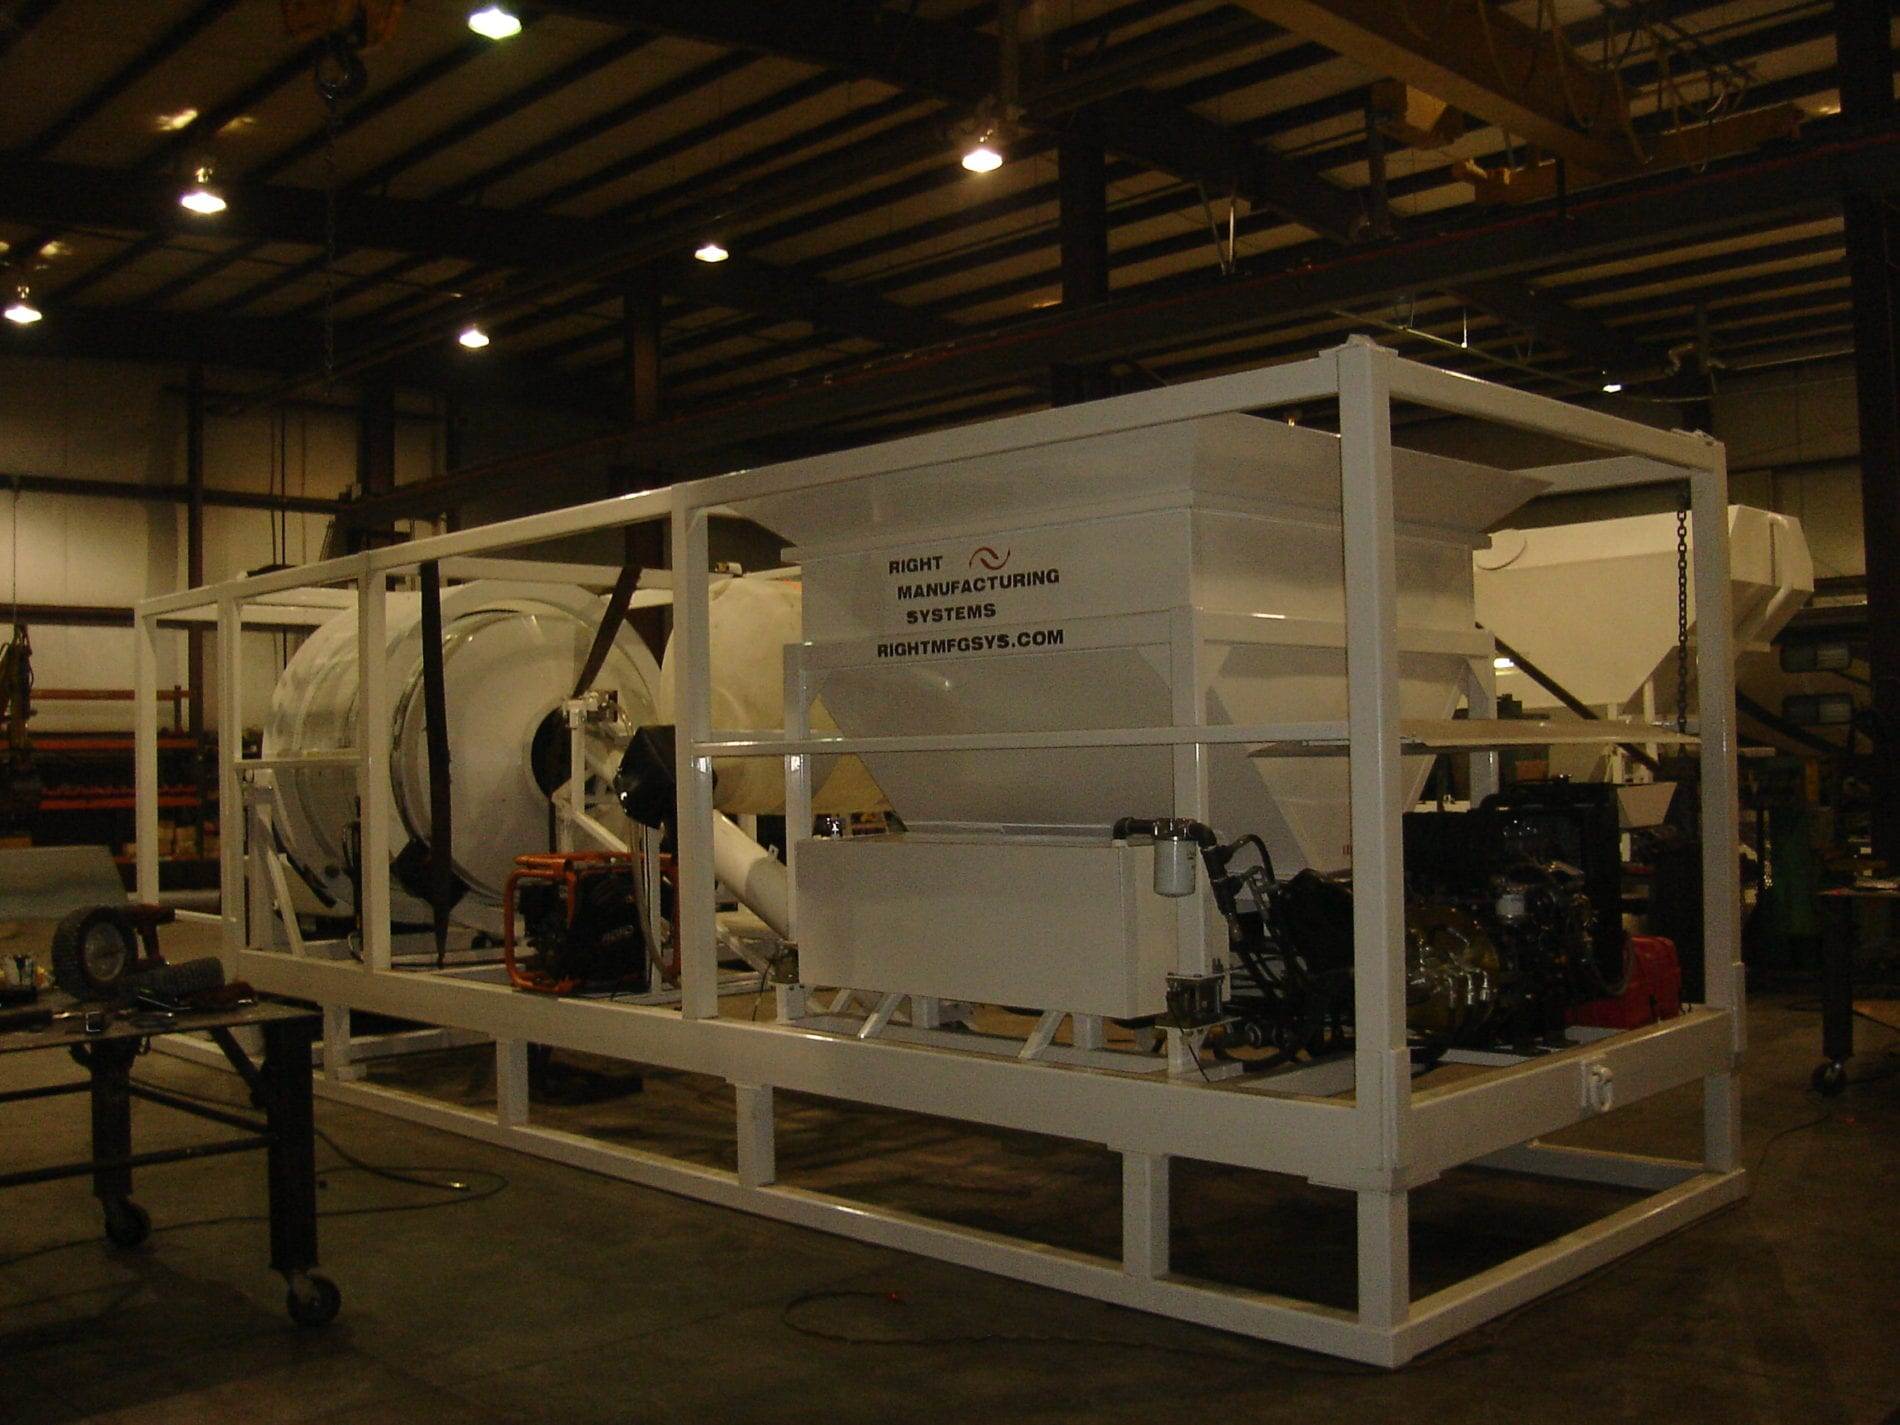 Custom Concrete Mixer Batching Plant Mix Right EZ 1-5-1 in Right Manufacturing Systems Inc.